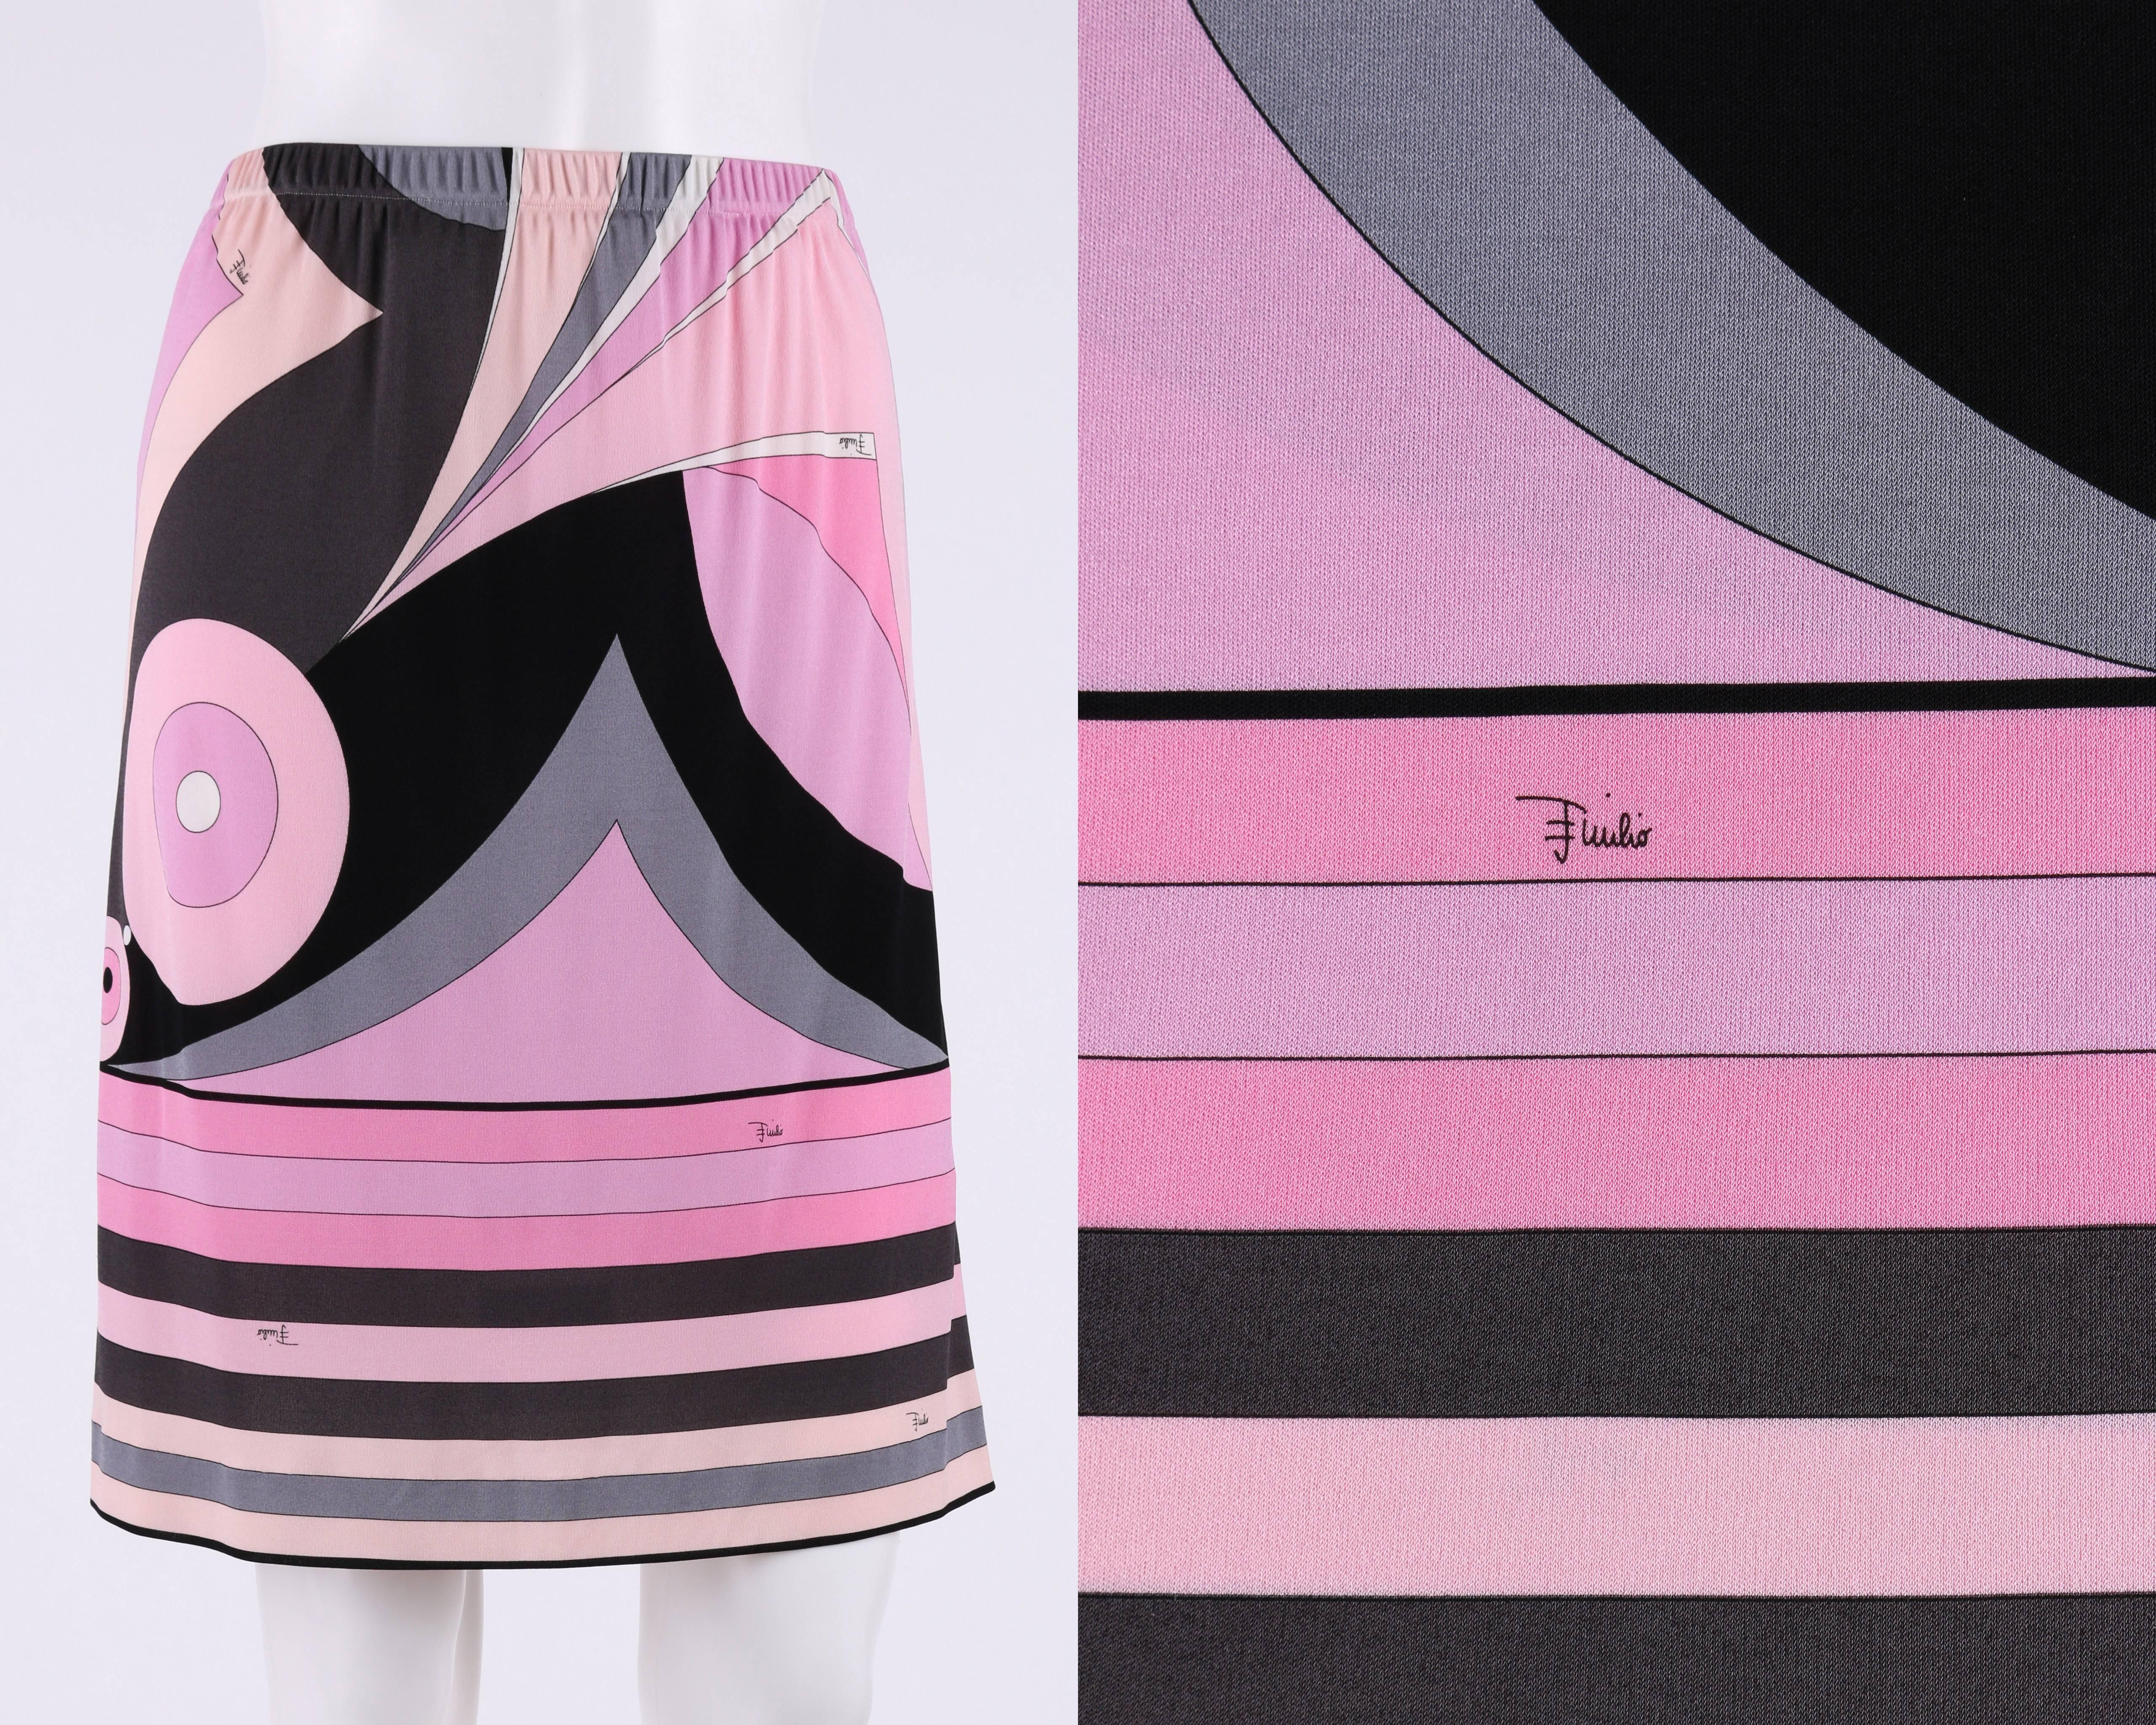 EMILIO PUCCI c.2000s Pink Multicolor Geometric Striped Motif Silk Jersey Skirt

Brand / Manufacturer: Emilio Pucci
Circa: 2000s
Style: A-line skirt
Color(s): Shades of pink, grey, and black
Marked Materials: 